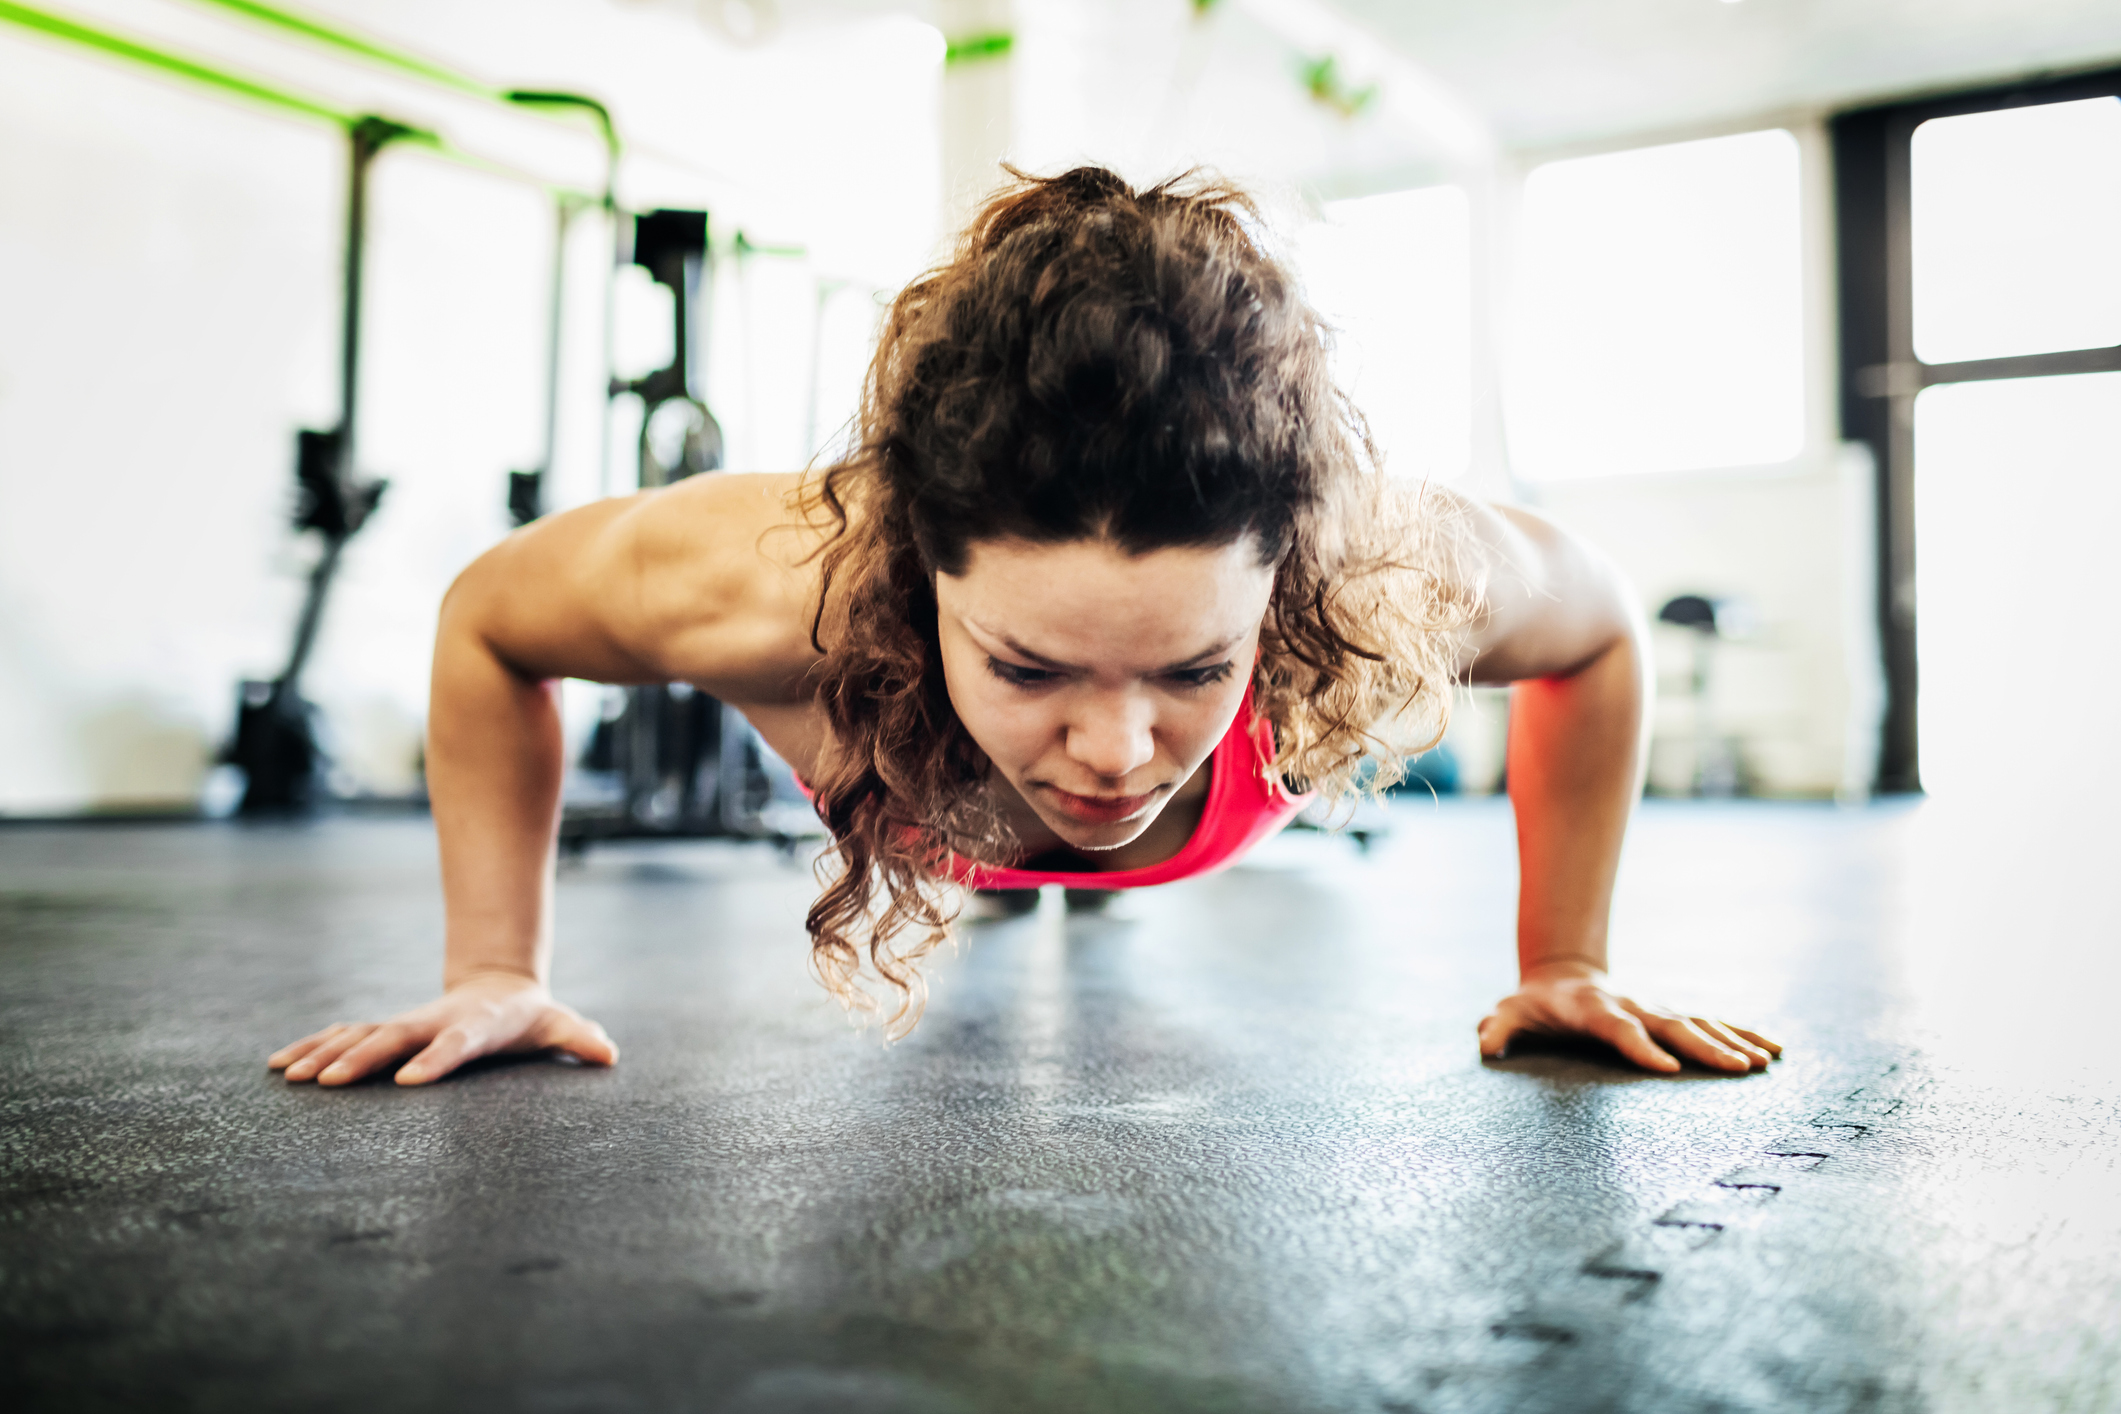 How To Do An Eccentric Push Up & Why You Should